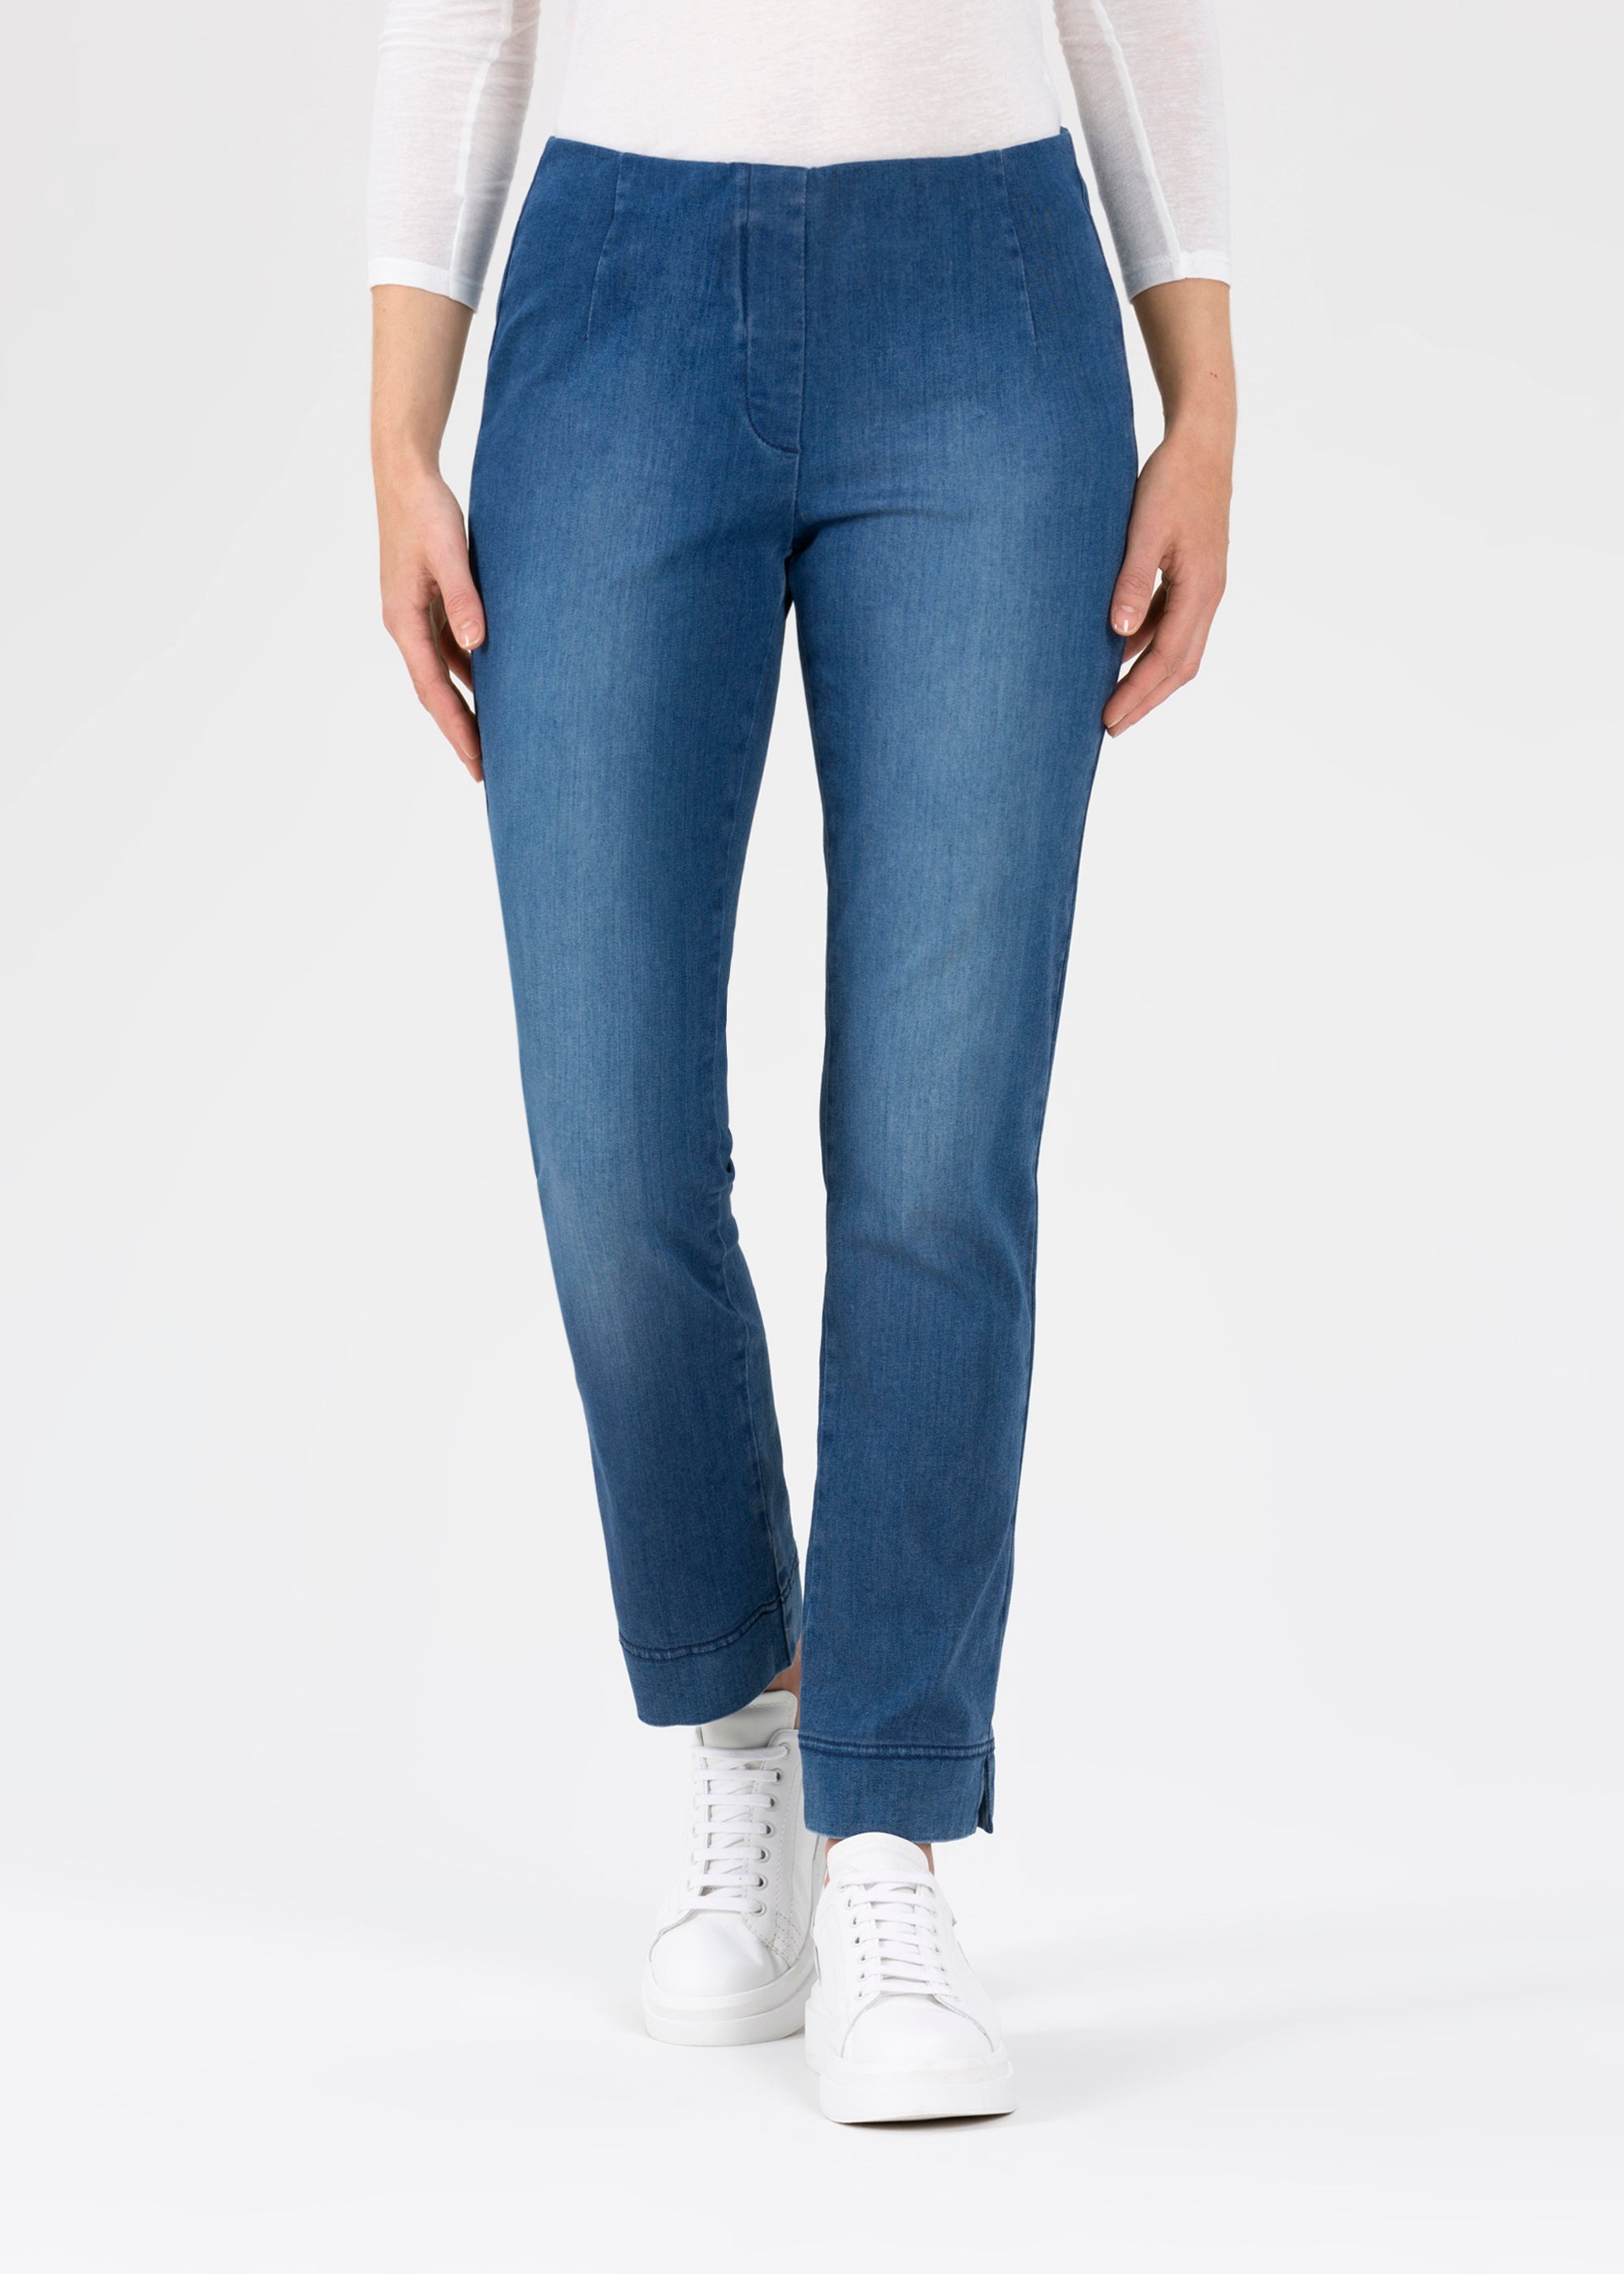 straight blue ONLINE – Jeans legs in with | SHOP Stehmann-store.com OFFICIAL Ina